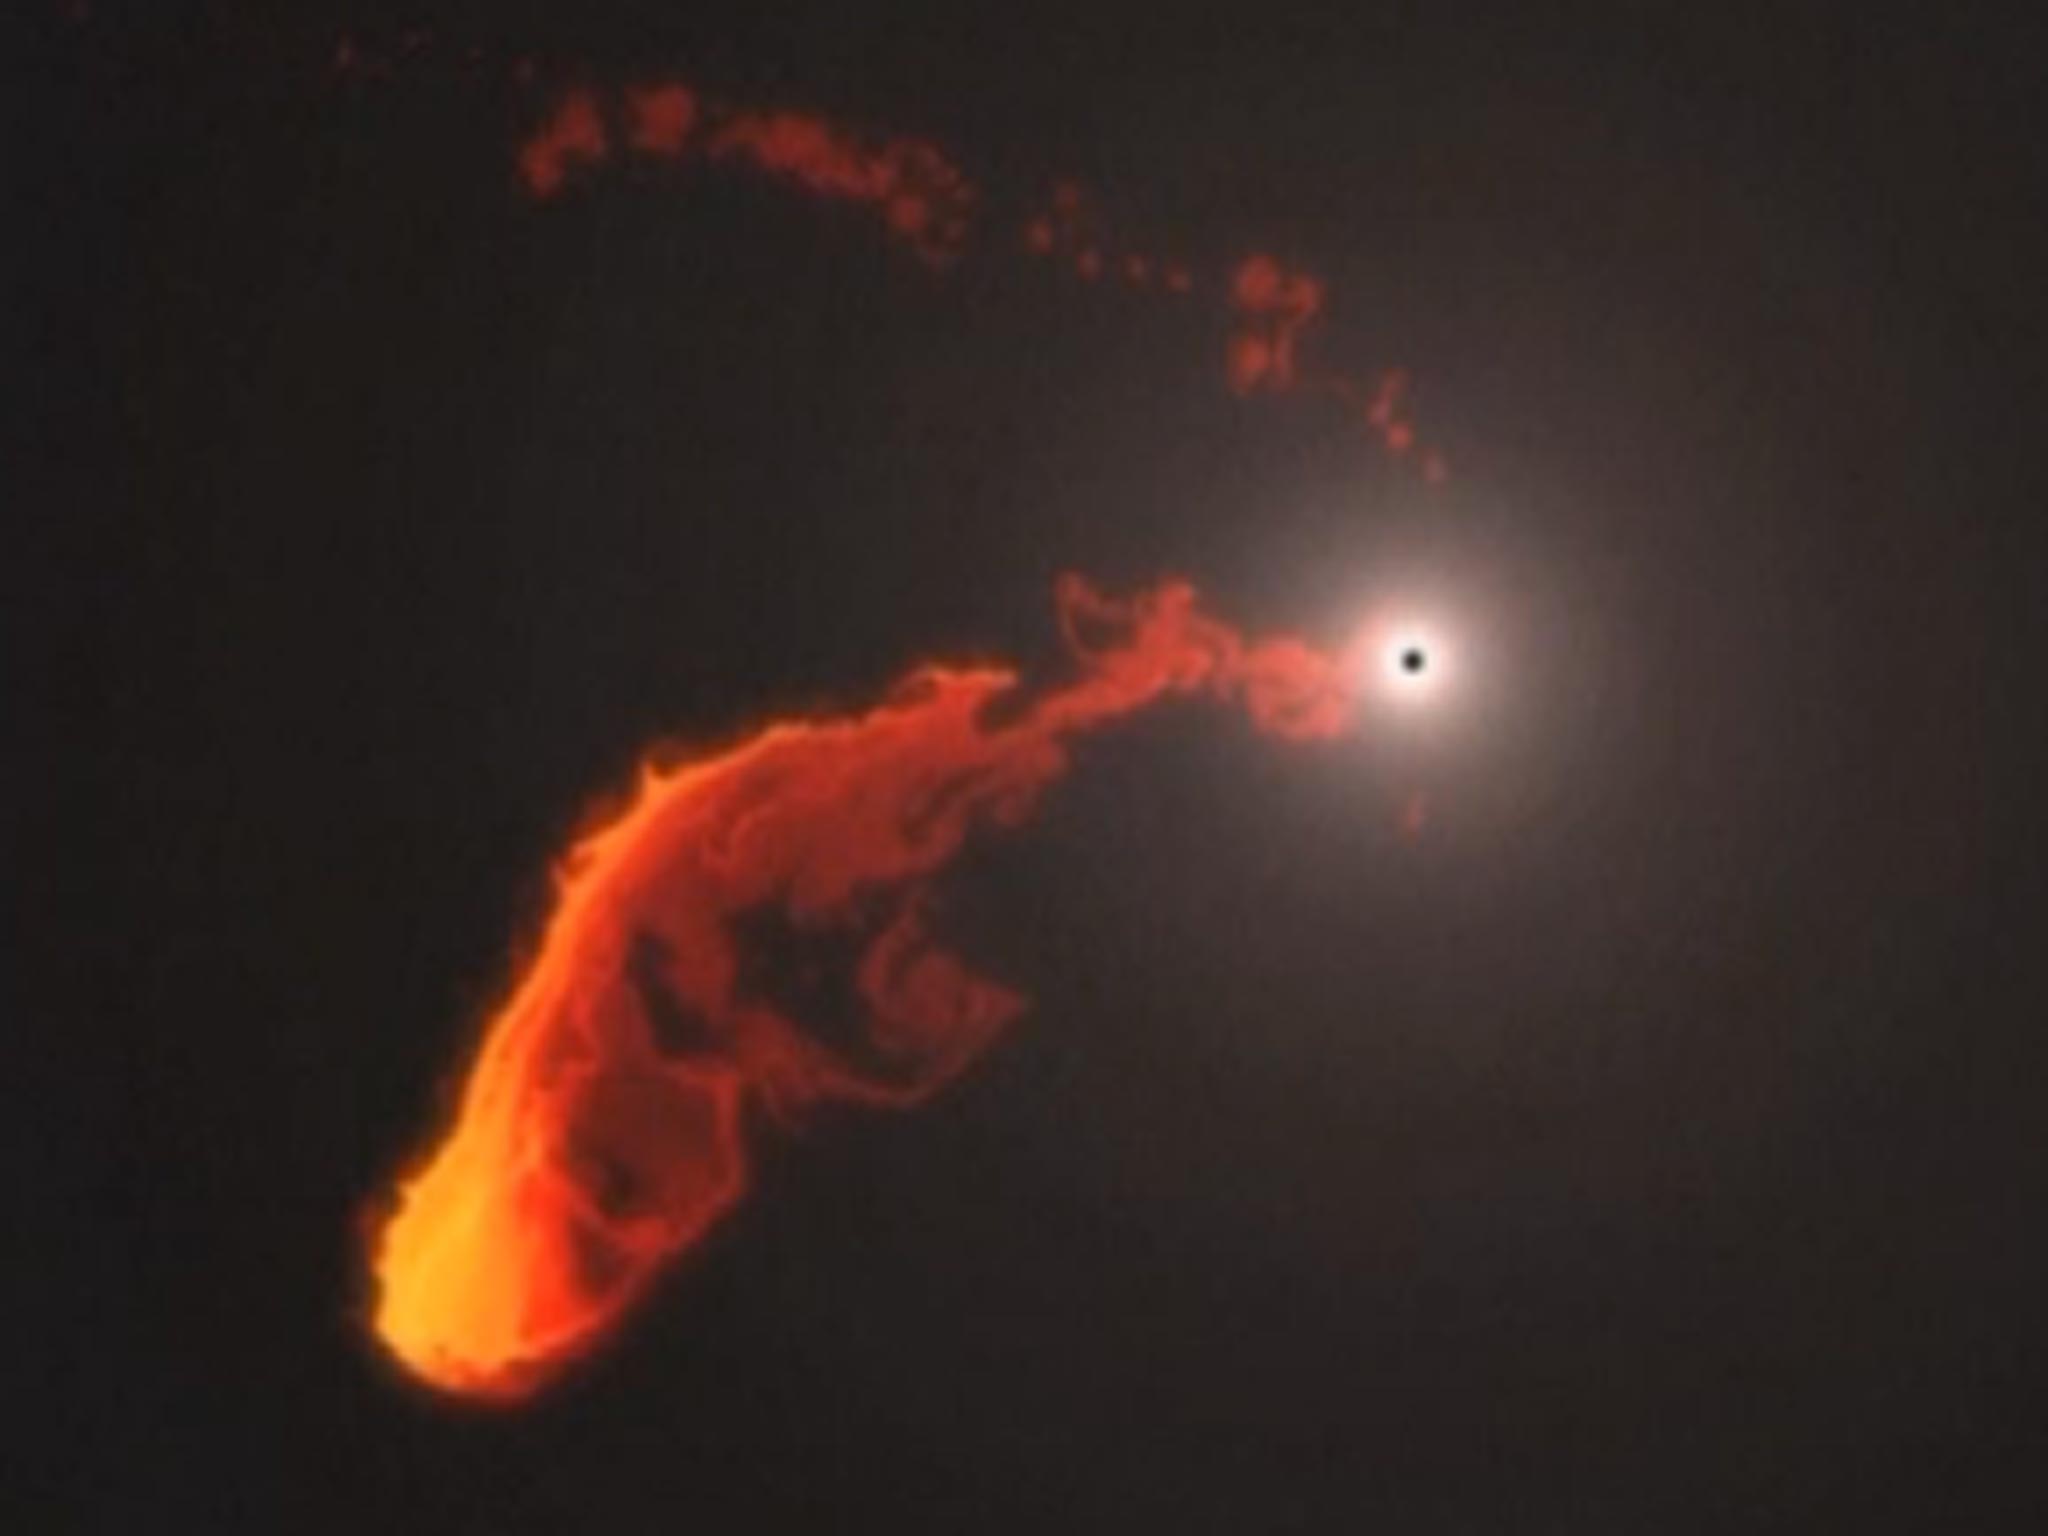 A simulation of the cloud of gas getting swallowed by the black hole